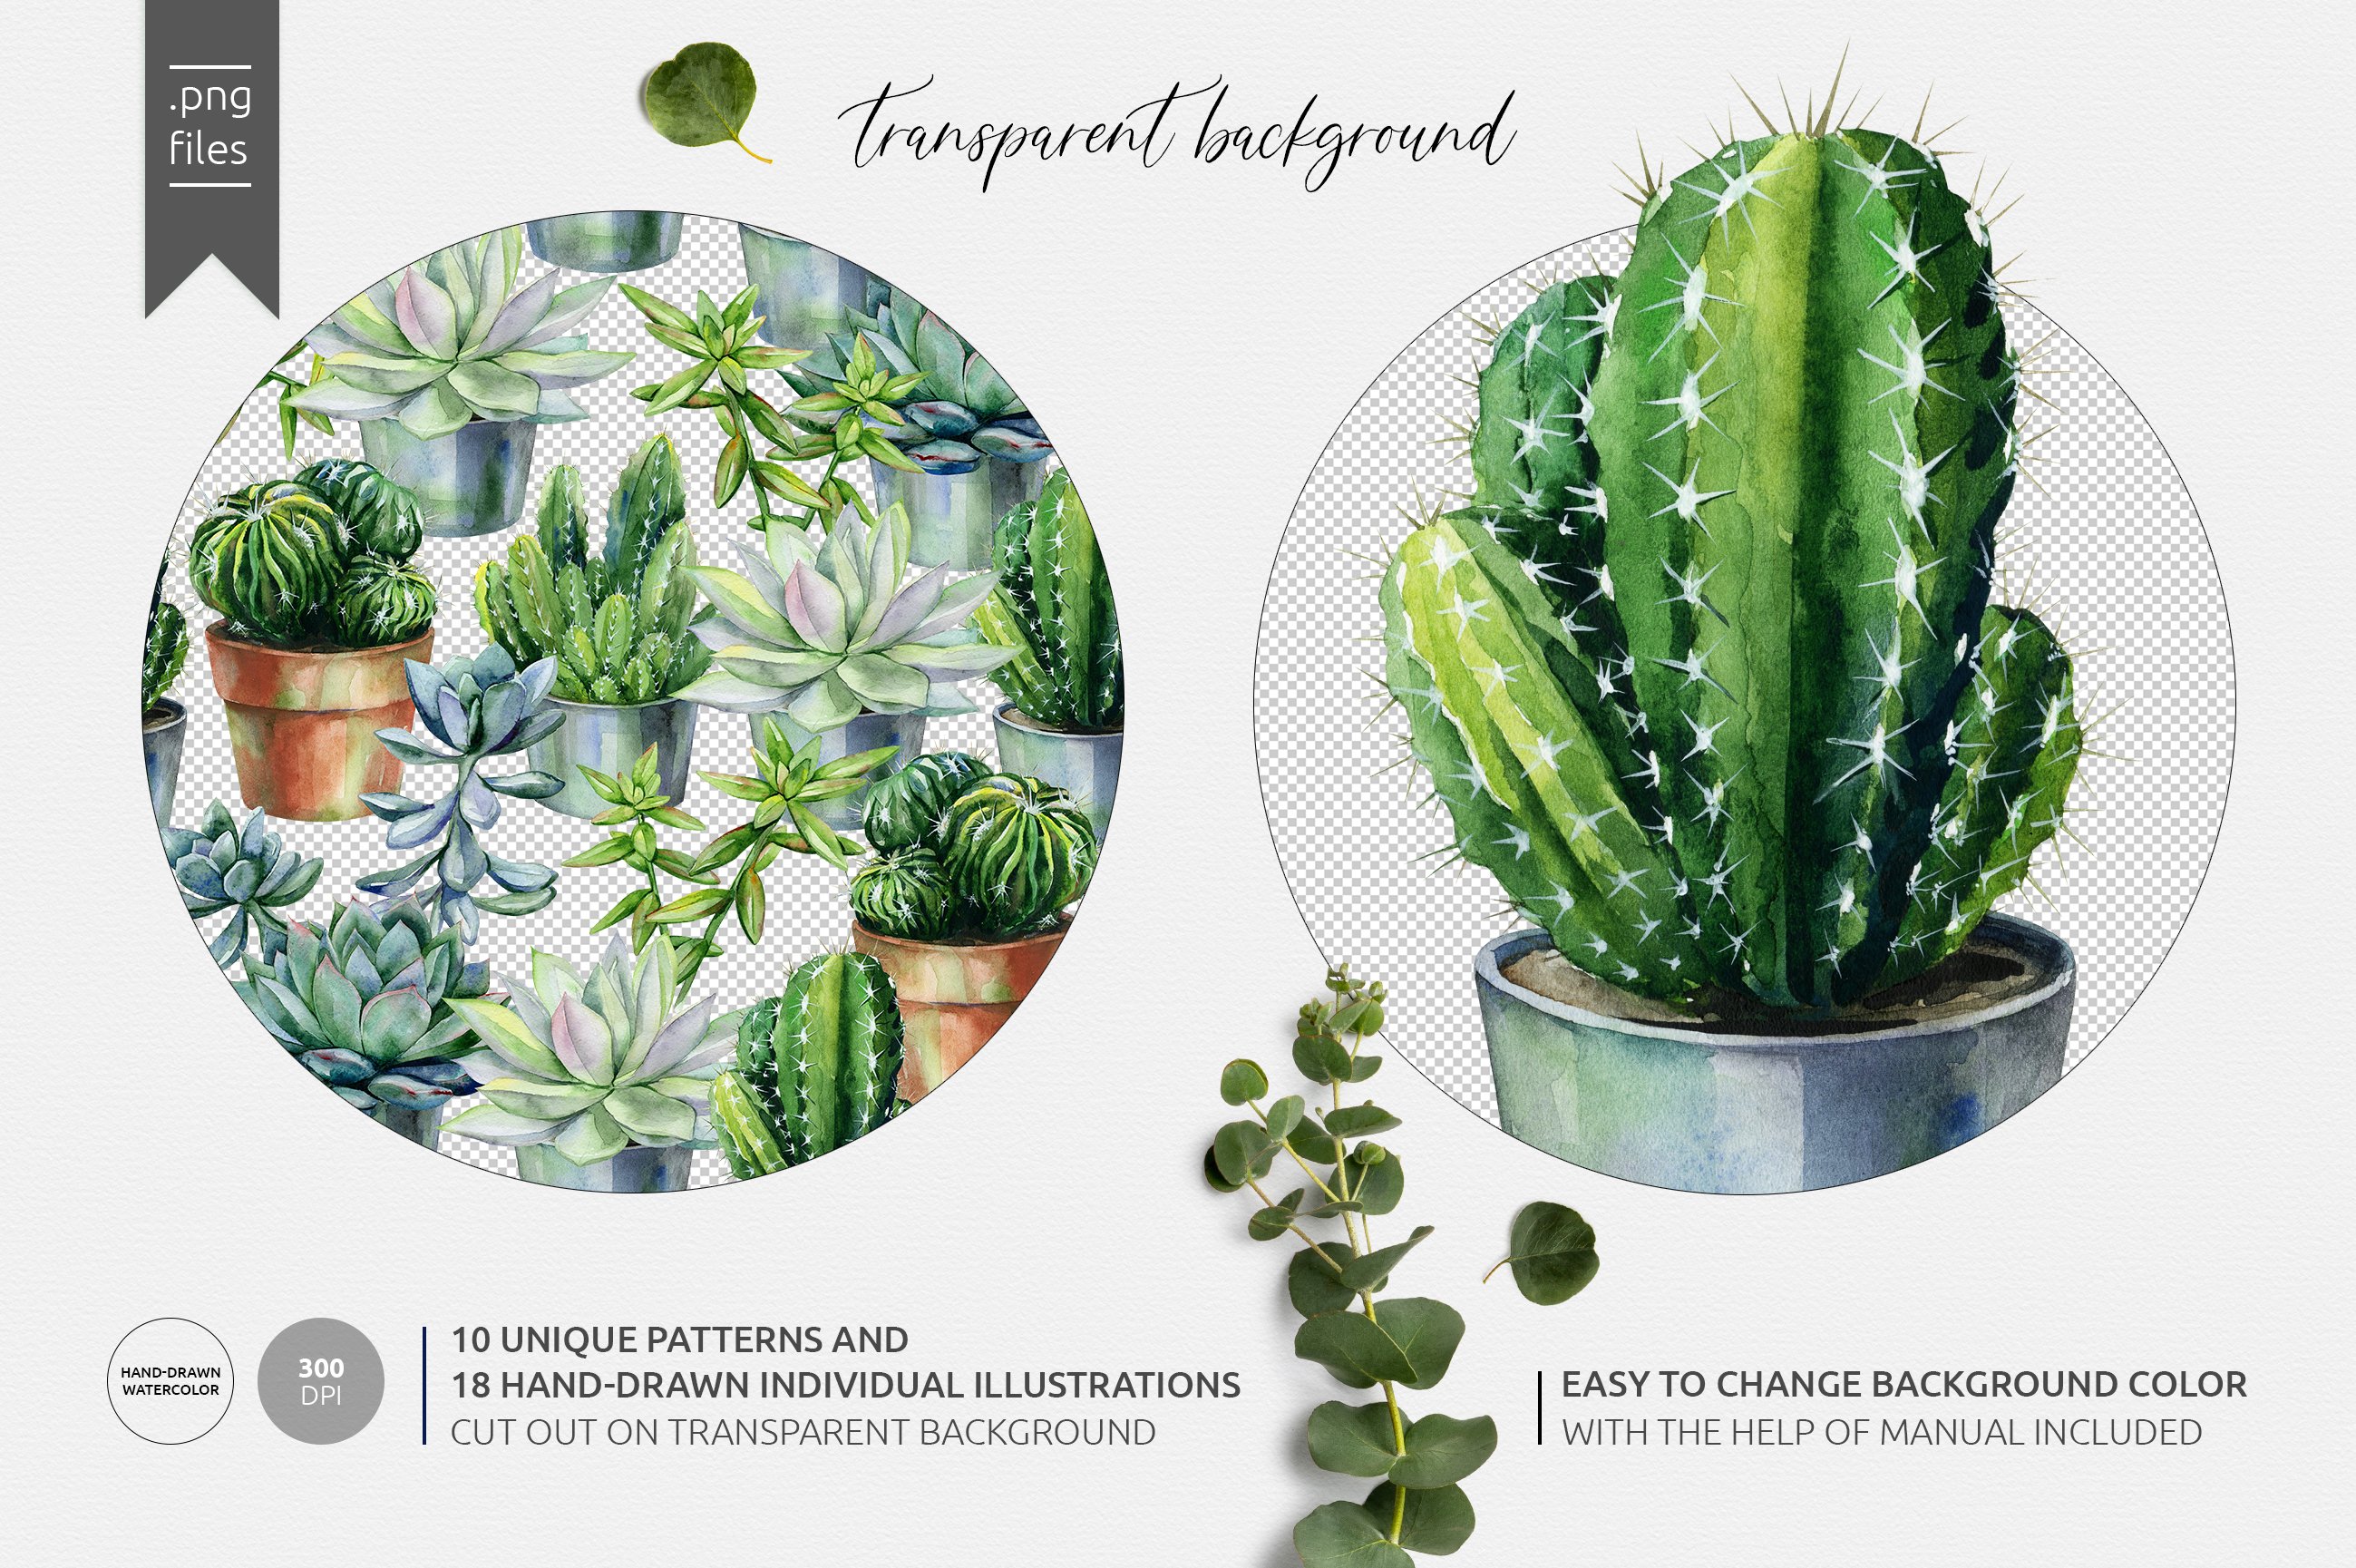 Cacti & Succulents preview image.